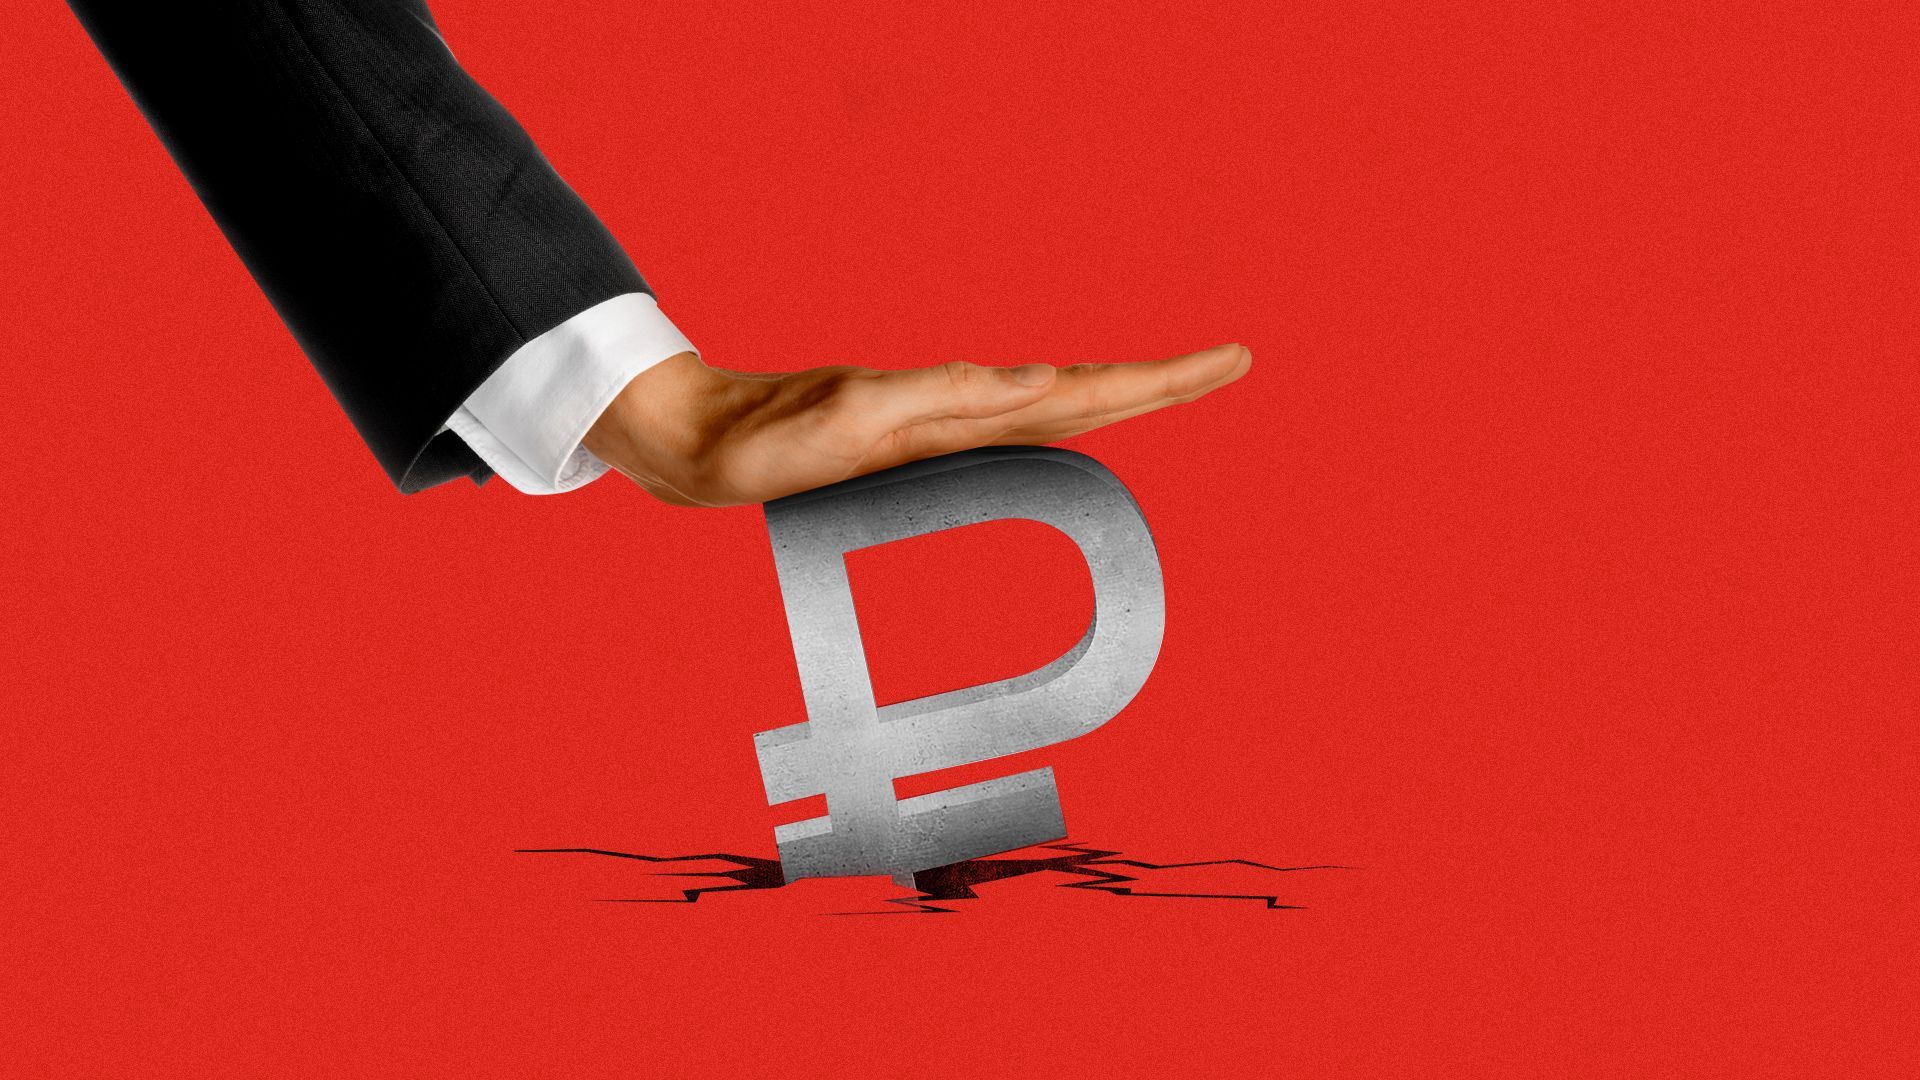 Illustration of a hand pushing a Ruble symbol into the ground.  